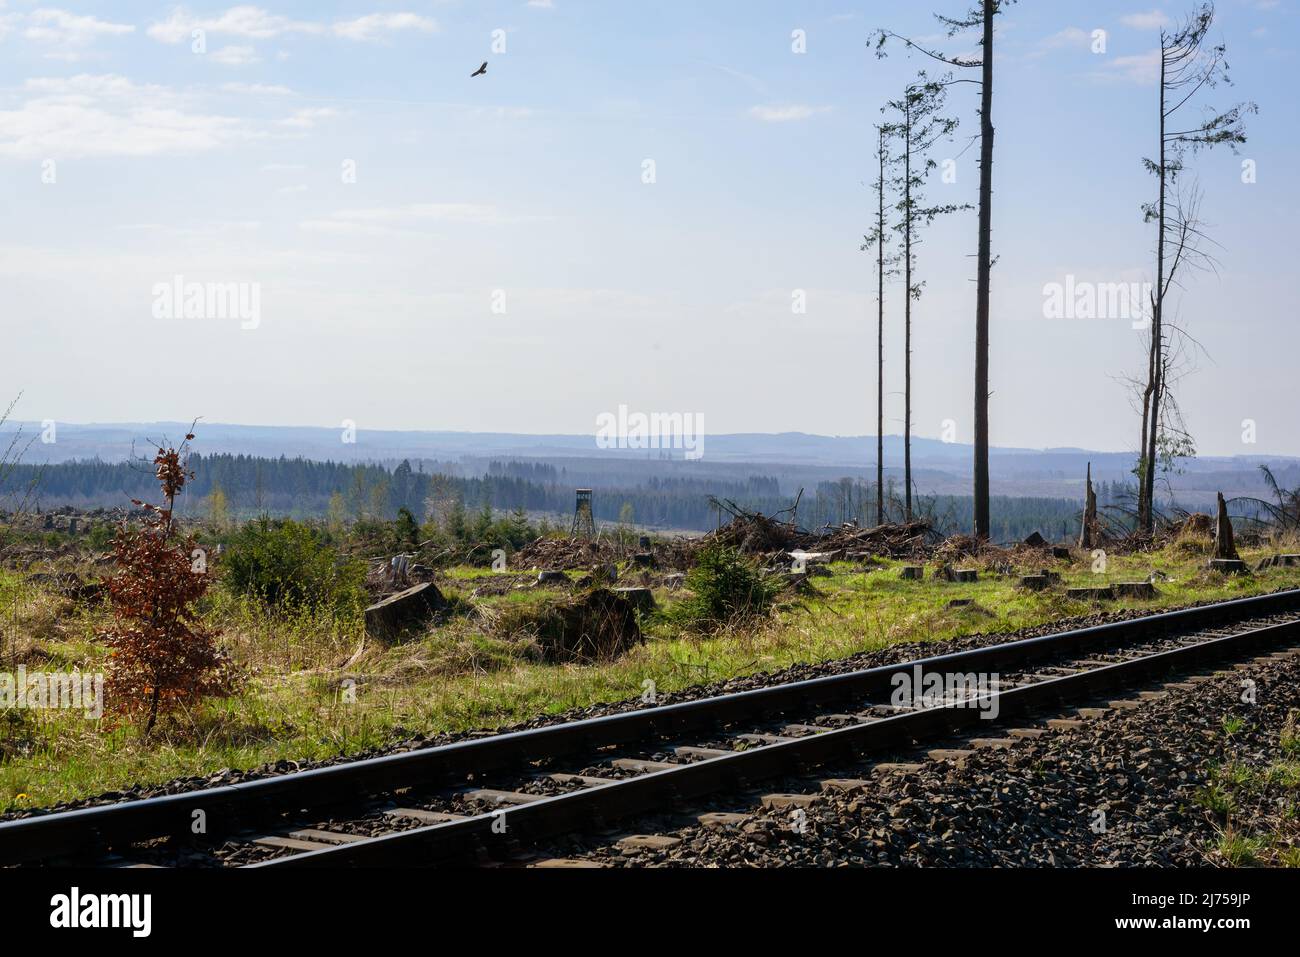 Deforestation caused by bark beetle infestation in fir trees already weakened by climate change in the Harz hill region of central Germany Stock Photo